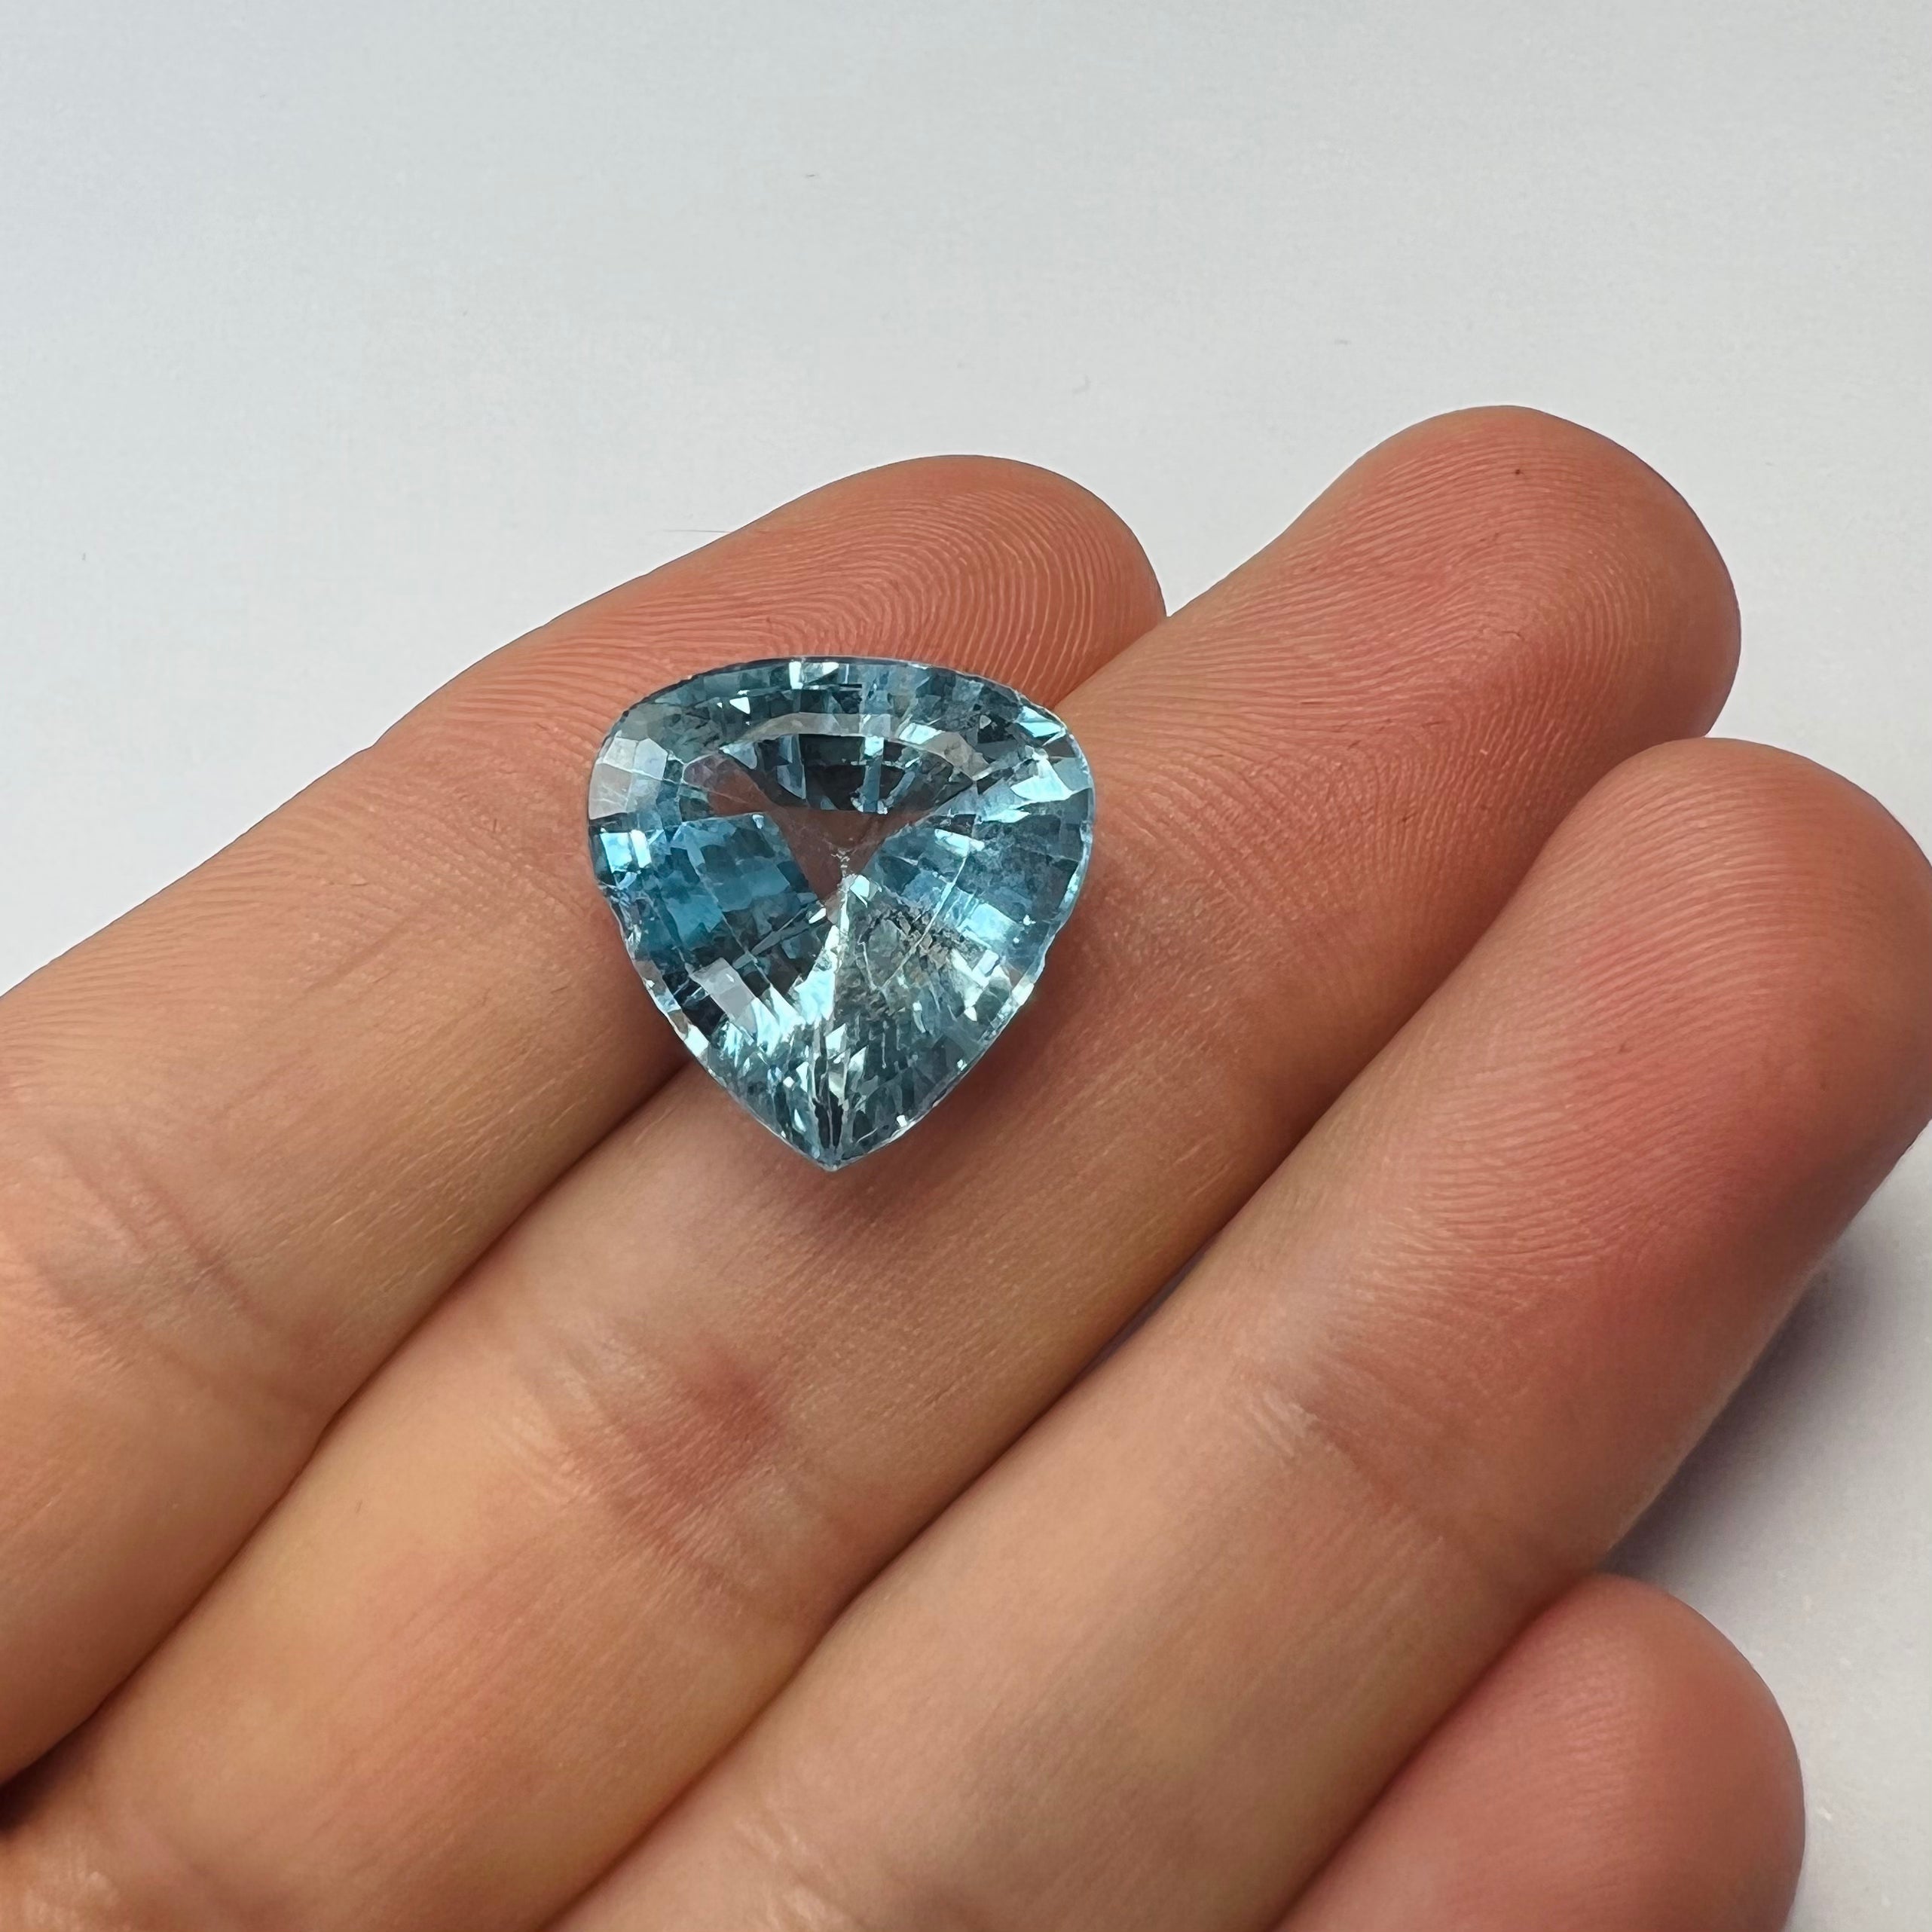 14.75CTW Loose Natural Trillion Cut Topaz 15.5x9.1mm Earth mined Gemstone